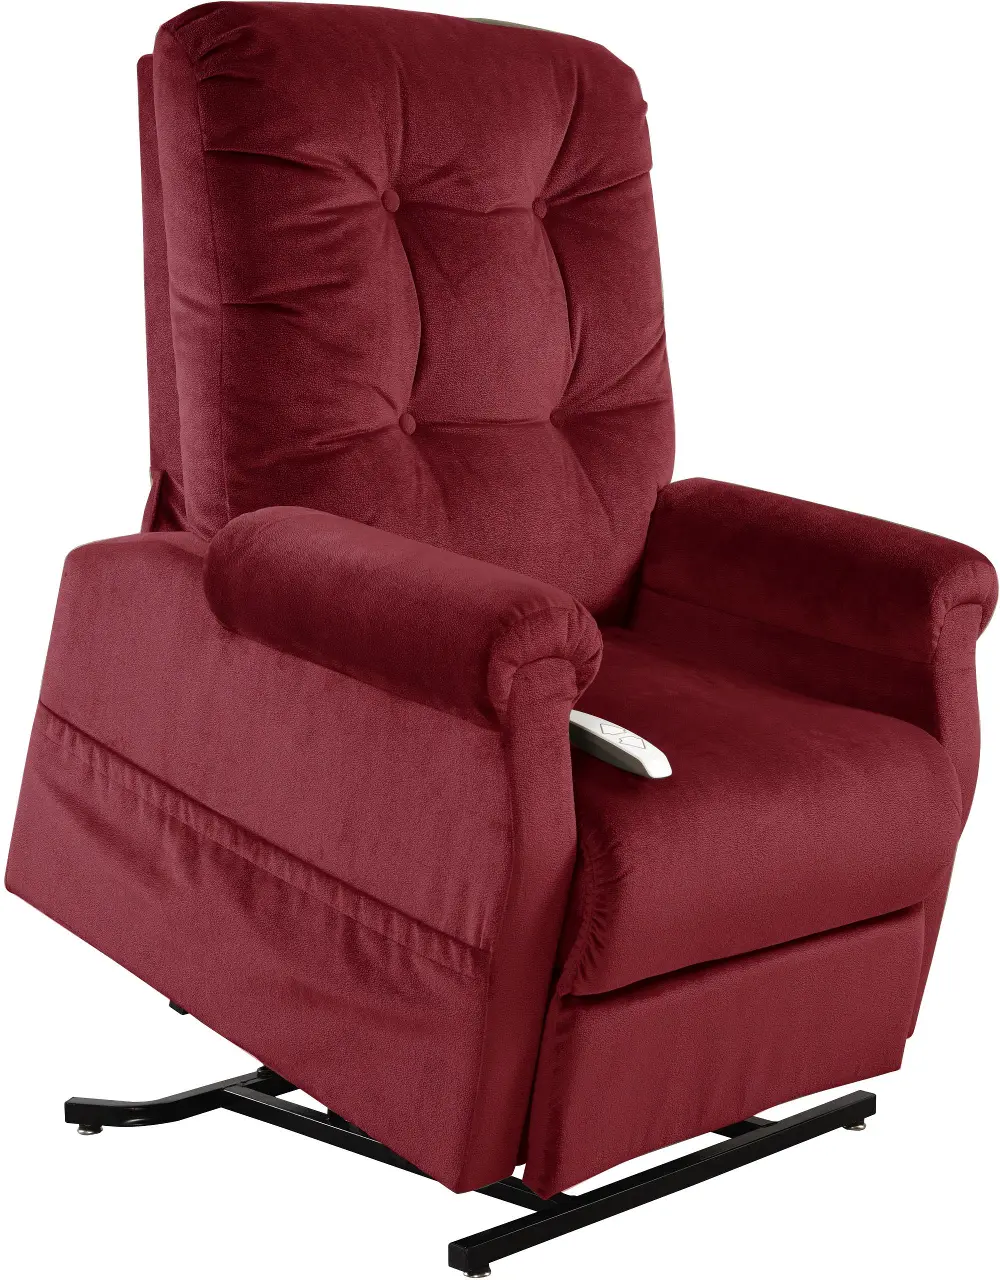 Wine Power Recliner With Lift Option-1